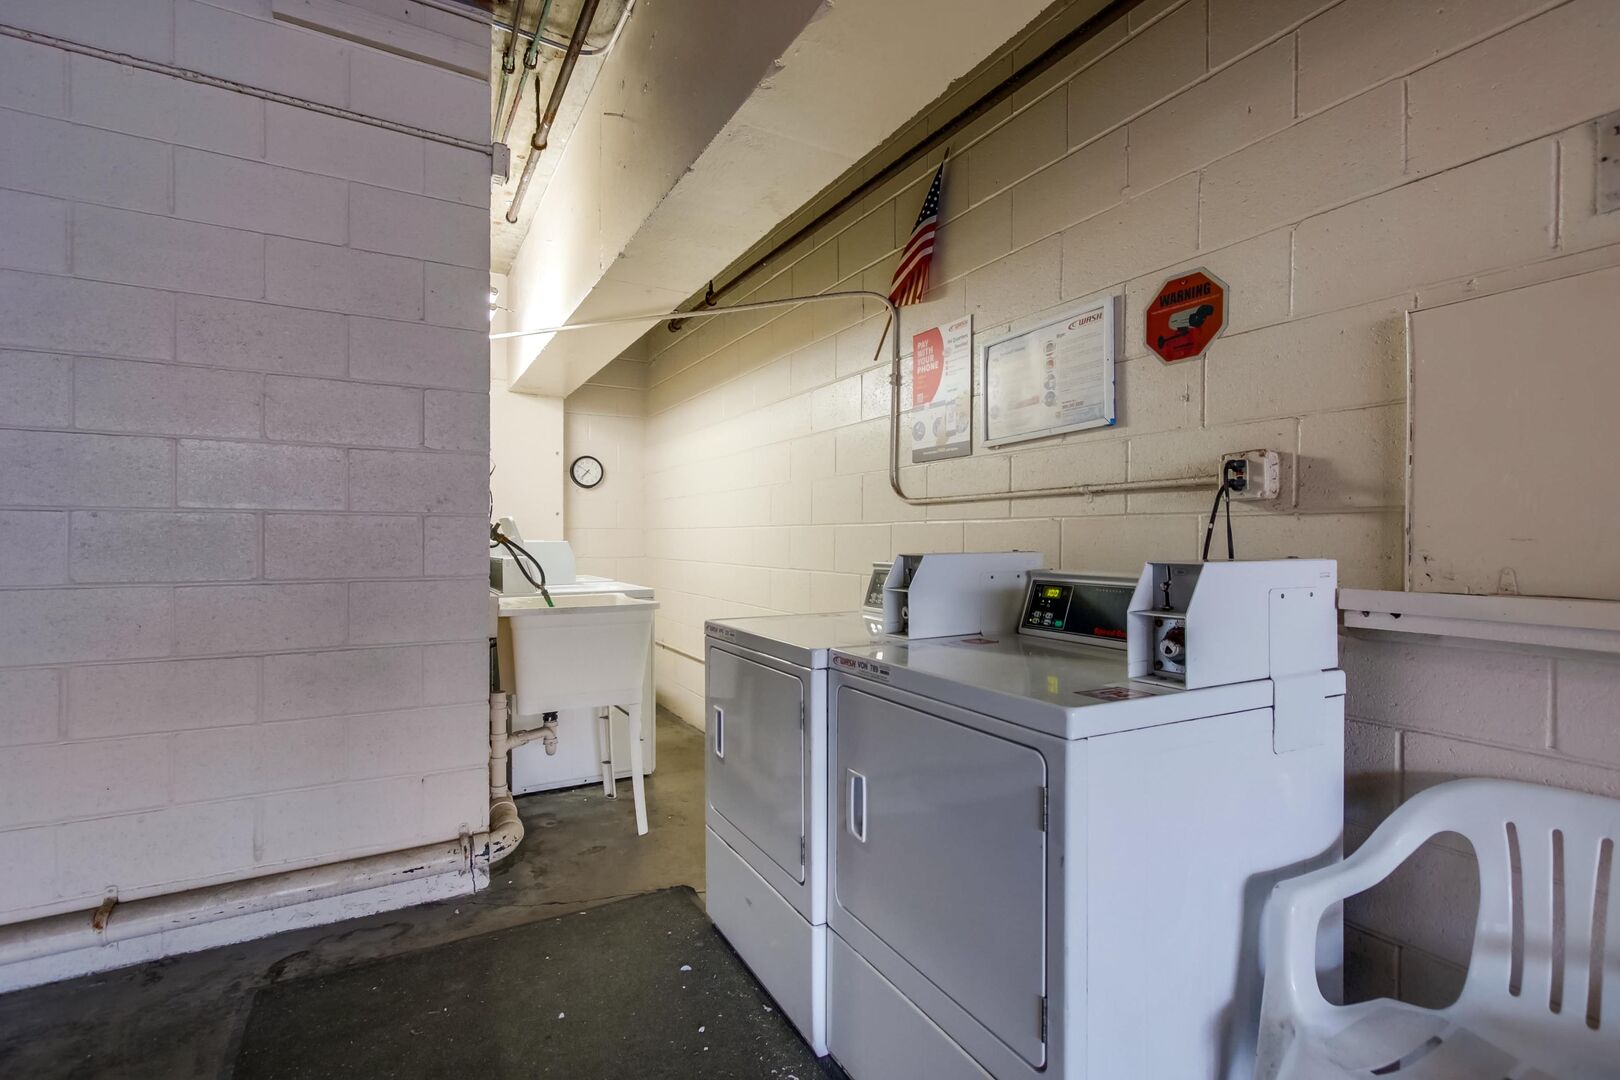 Shared coin operated laundry in parking garage